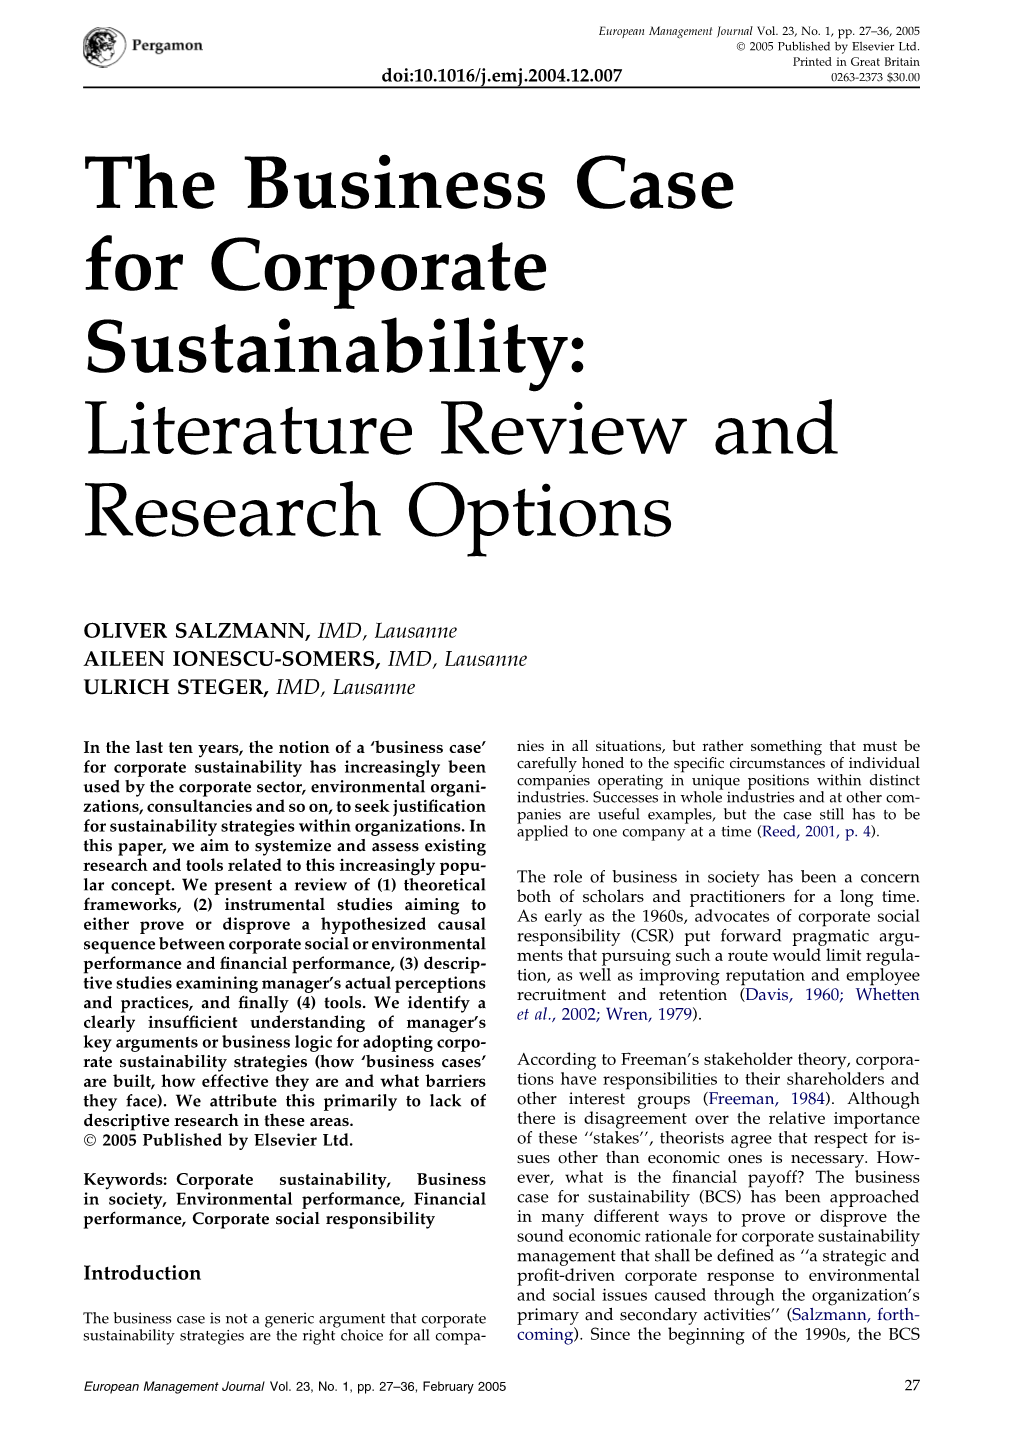 The Business Case for Corporate Sustainability: Literature Review and Research Options